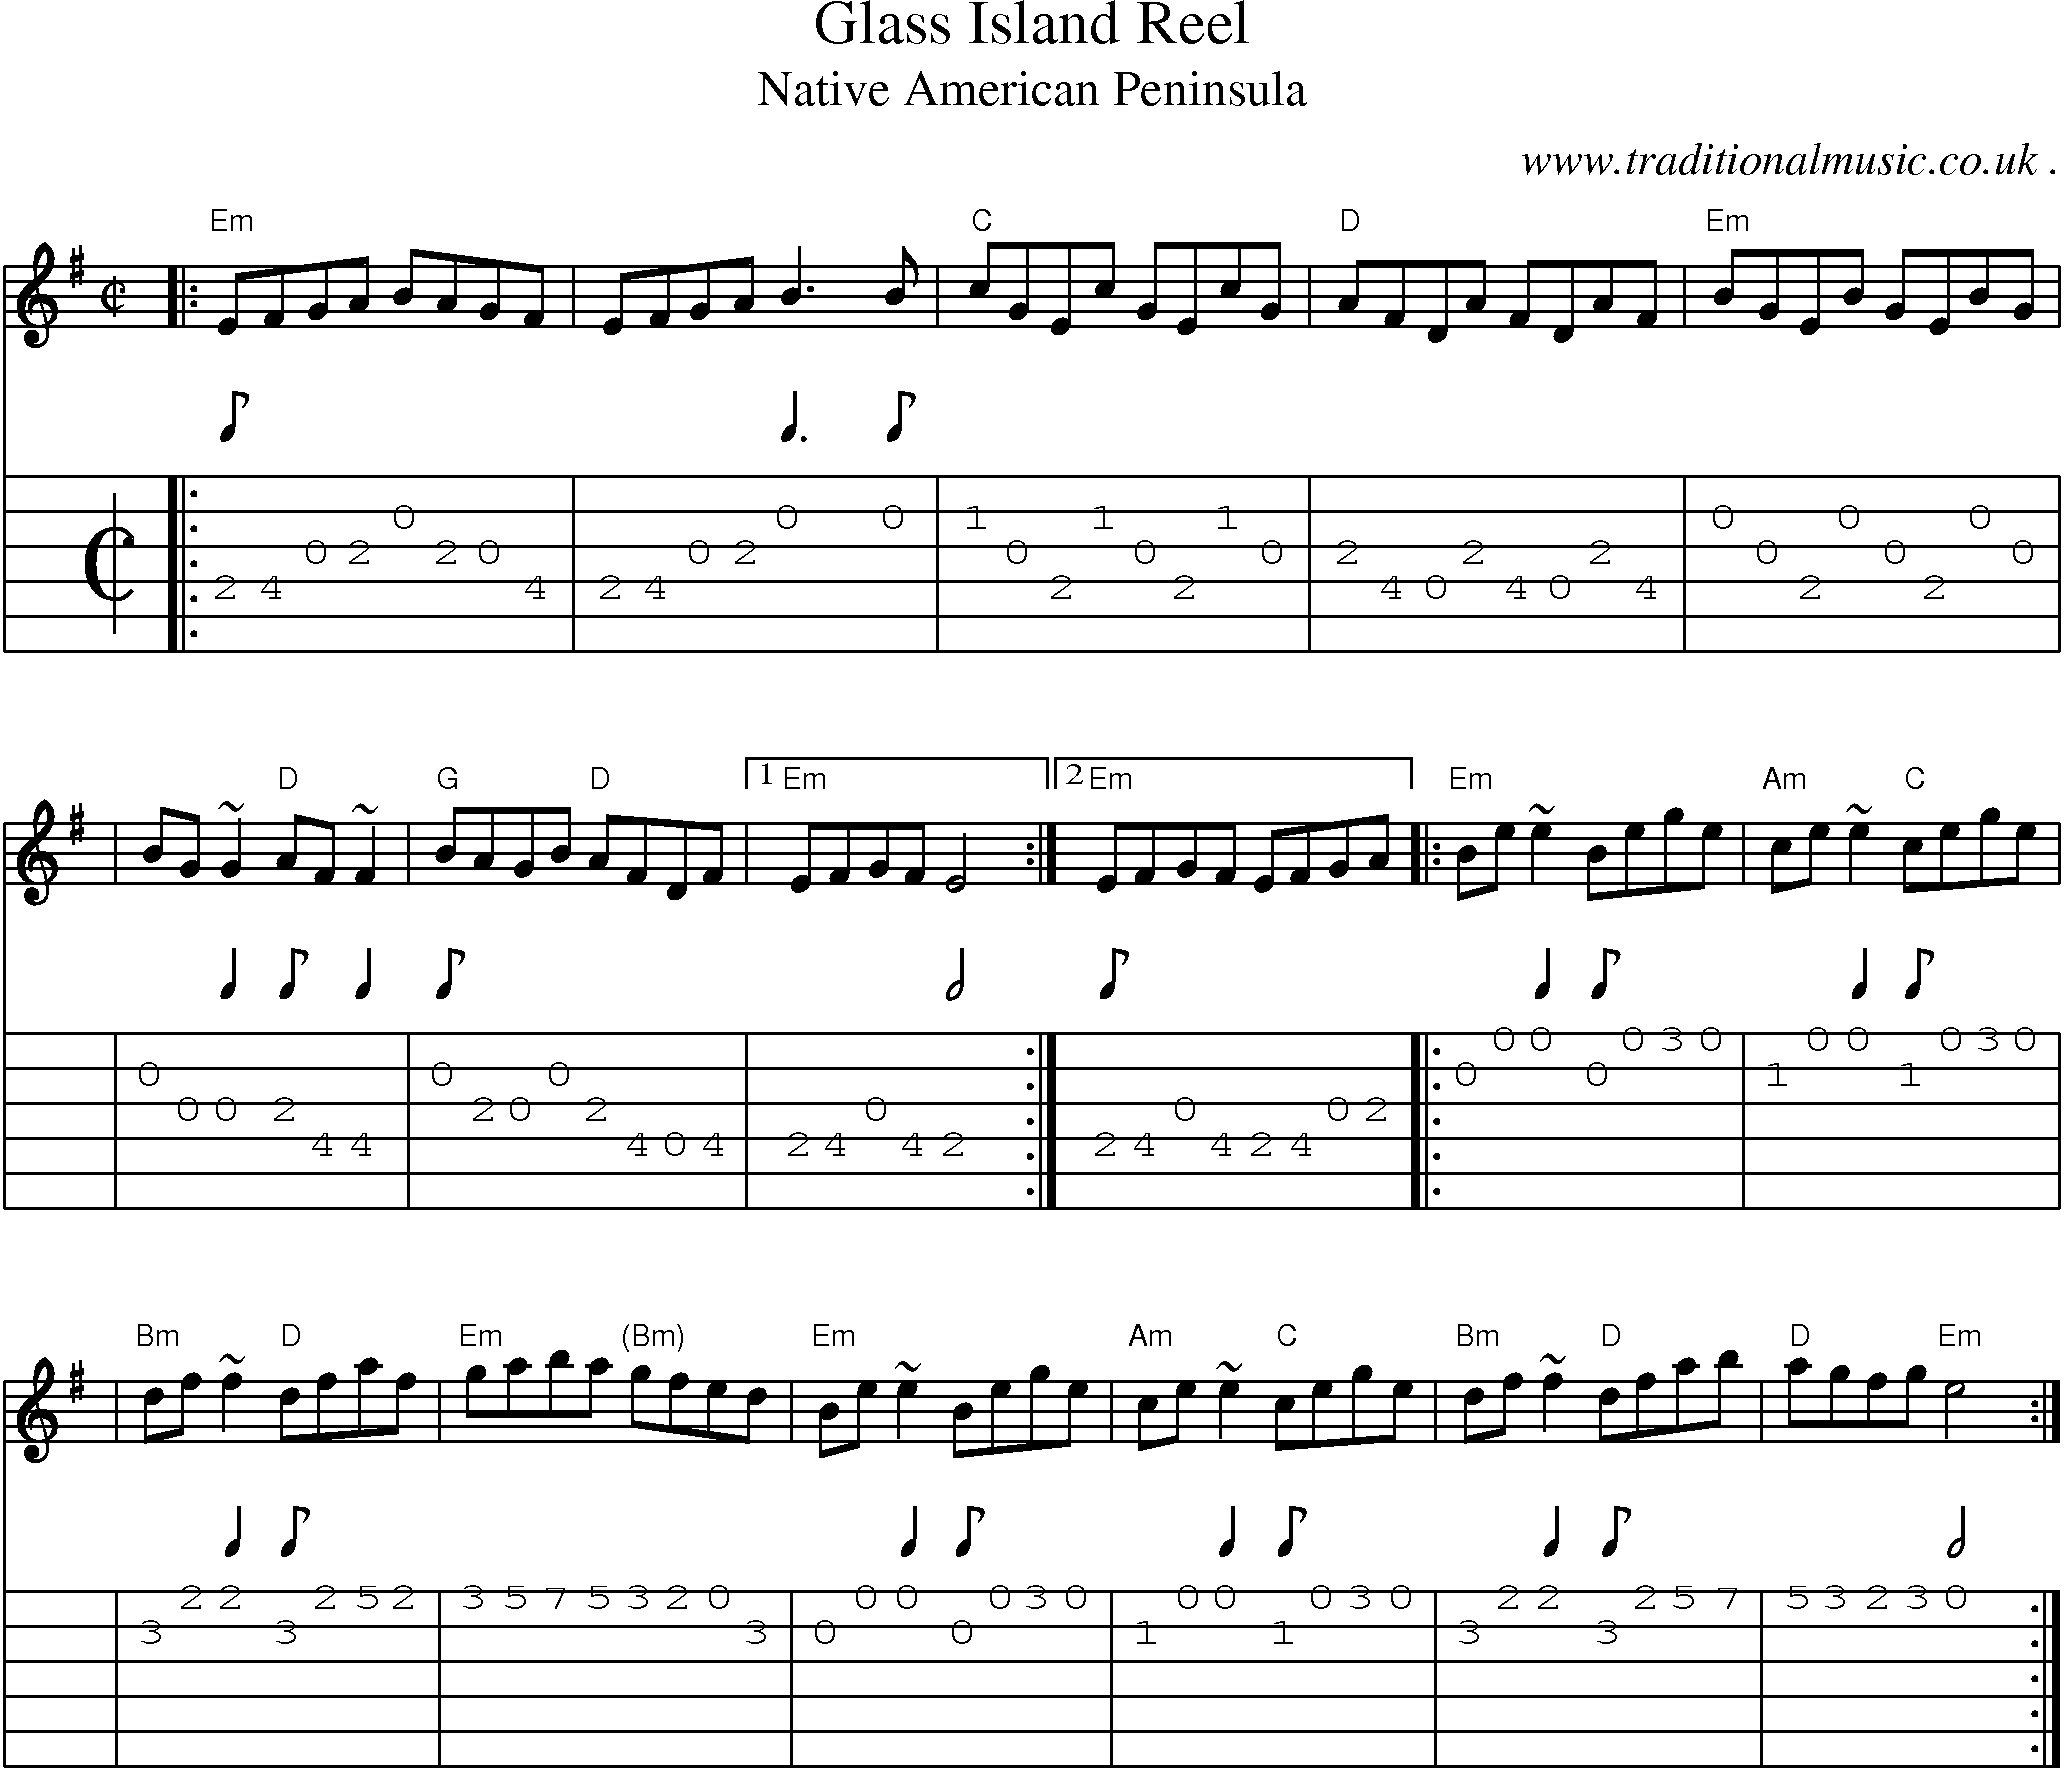 Sheet-music  score, Chords and Guitar Tabs for Glass Island Reel